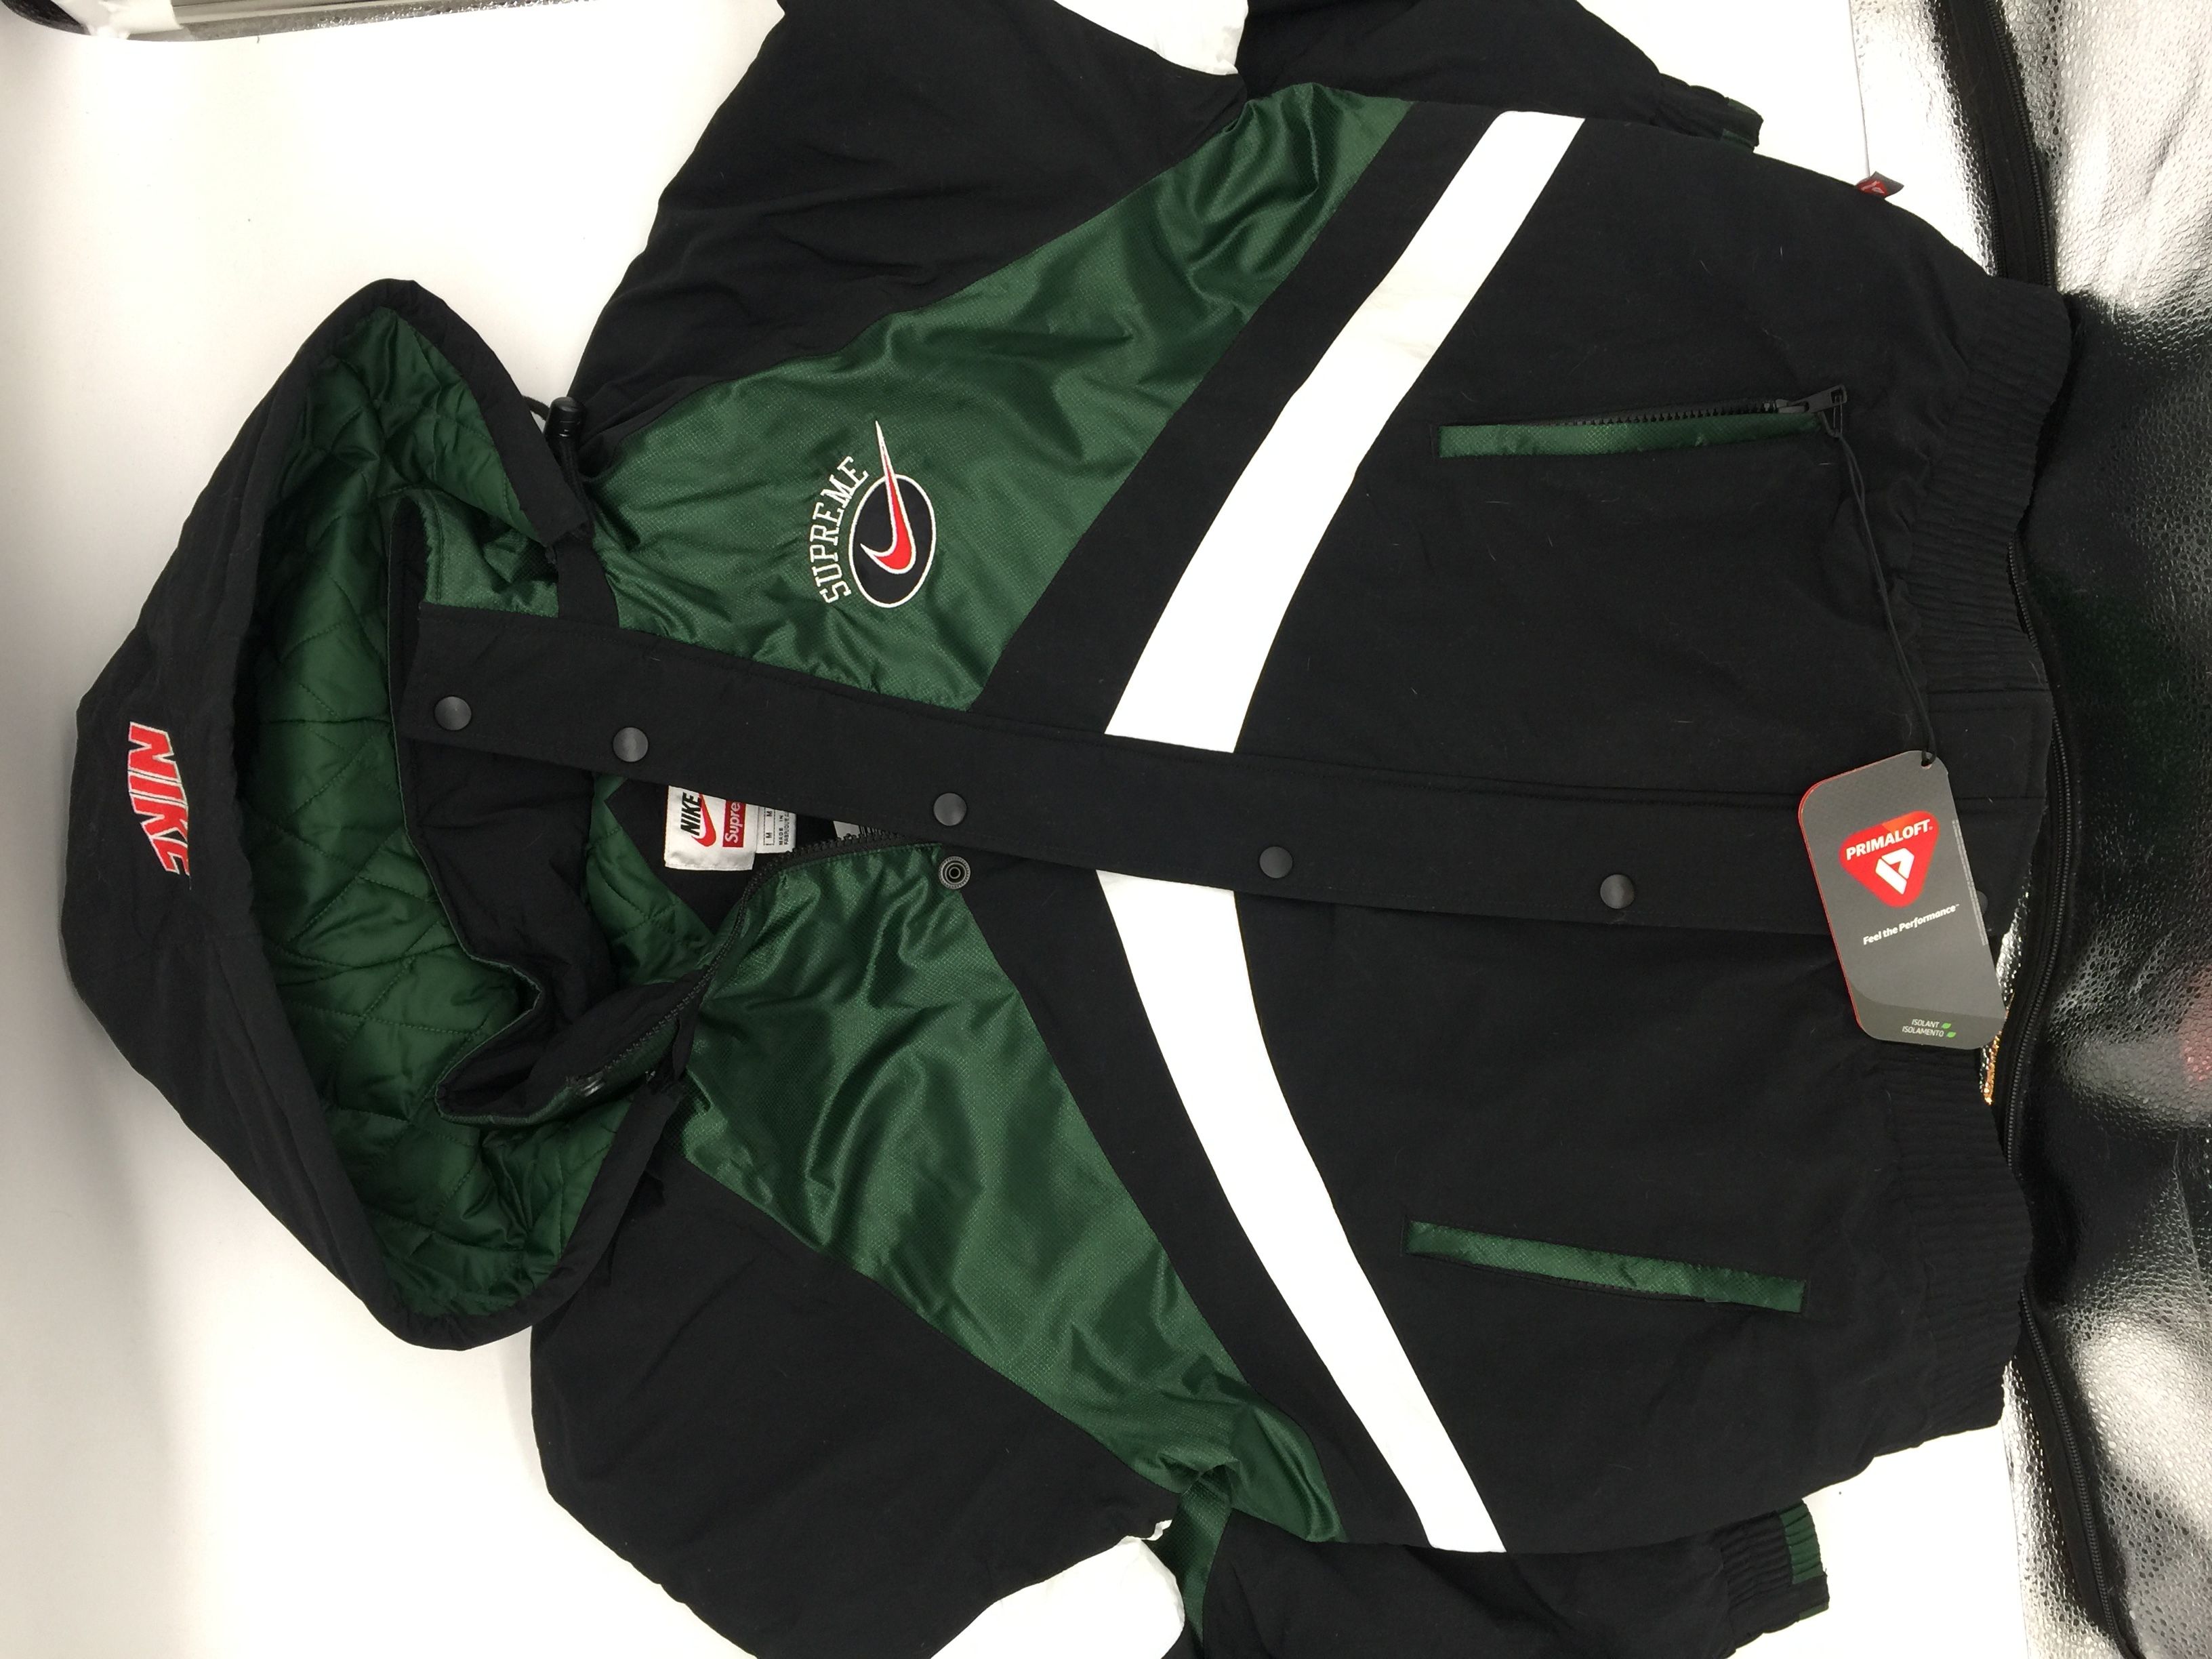 Supreme x Nike Sport Jacket going out now! 🔥 Size L for $300